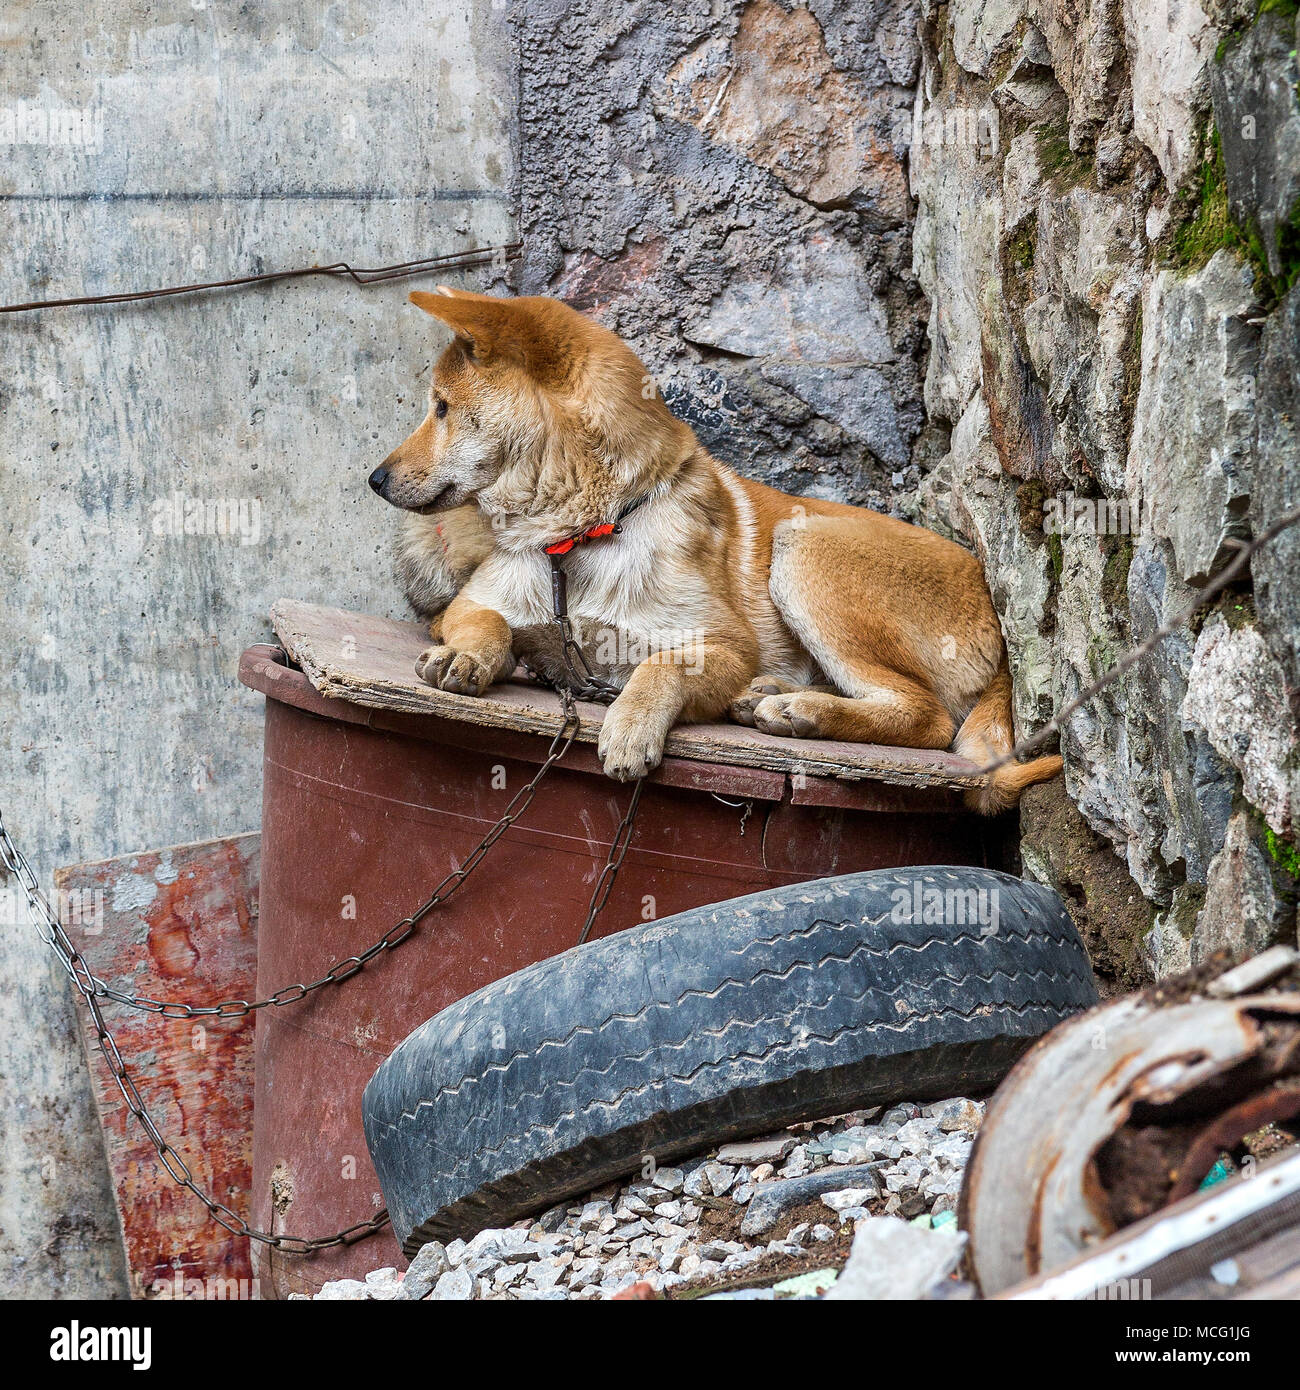 A gold coloured guard dog lying on a piece of wood amongst some rubble. The dog is chained to a wall and is alert to it's surroundings. Stock Photo